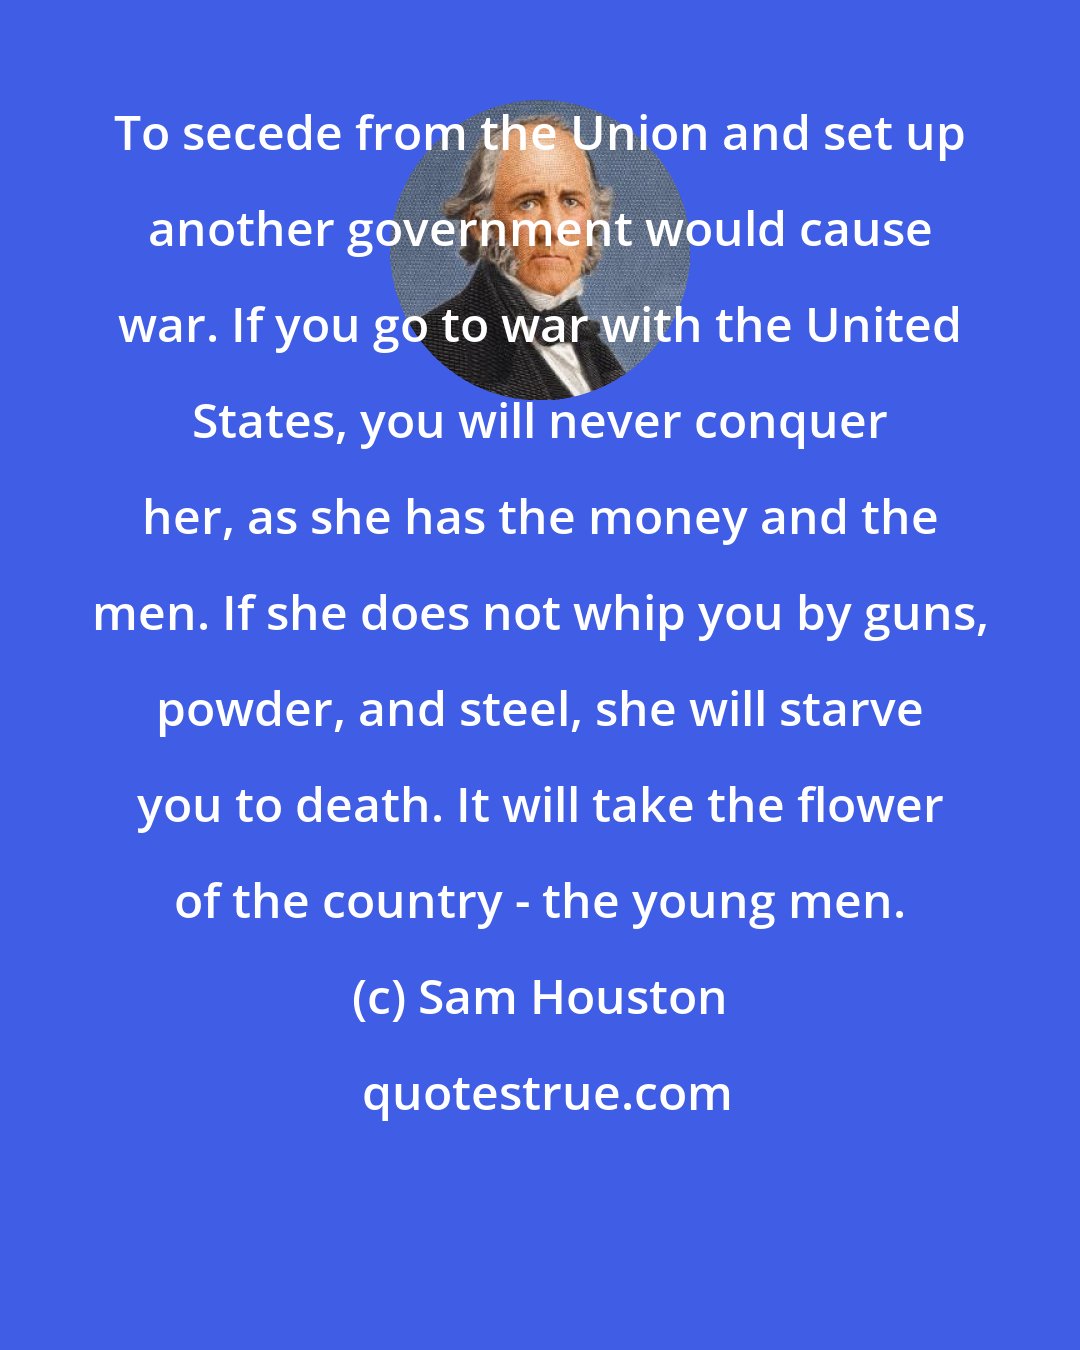 Sam Houston: To secede from the Union and set up another government would cause war. If you go to war with the United States, you will never conquer her, as she has the money and the men. If she does not whip you by guns, powder, and steel, she will starve you to death. It will take the flower of the country - the young men.